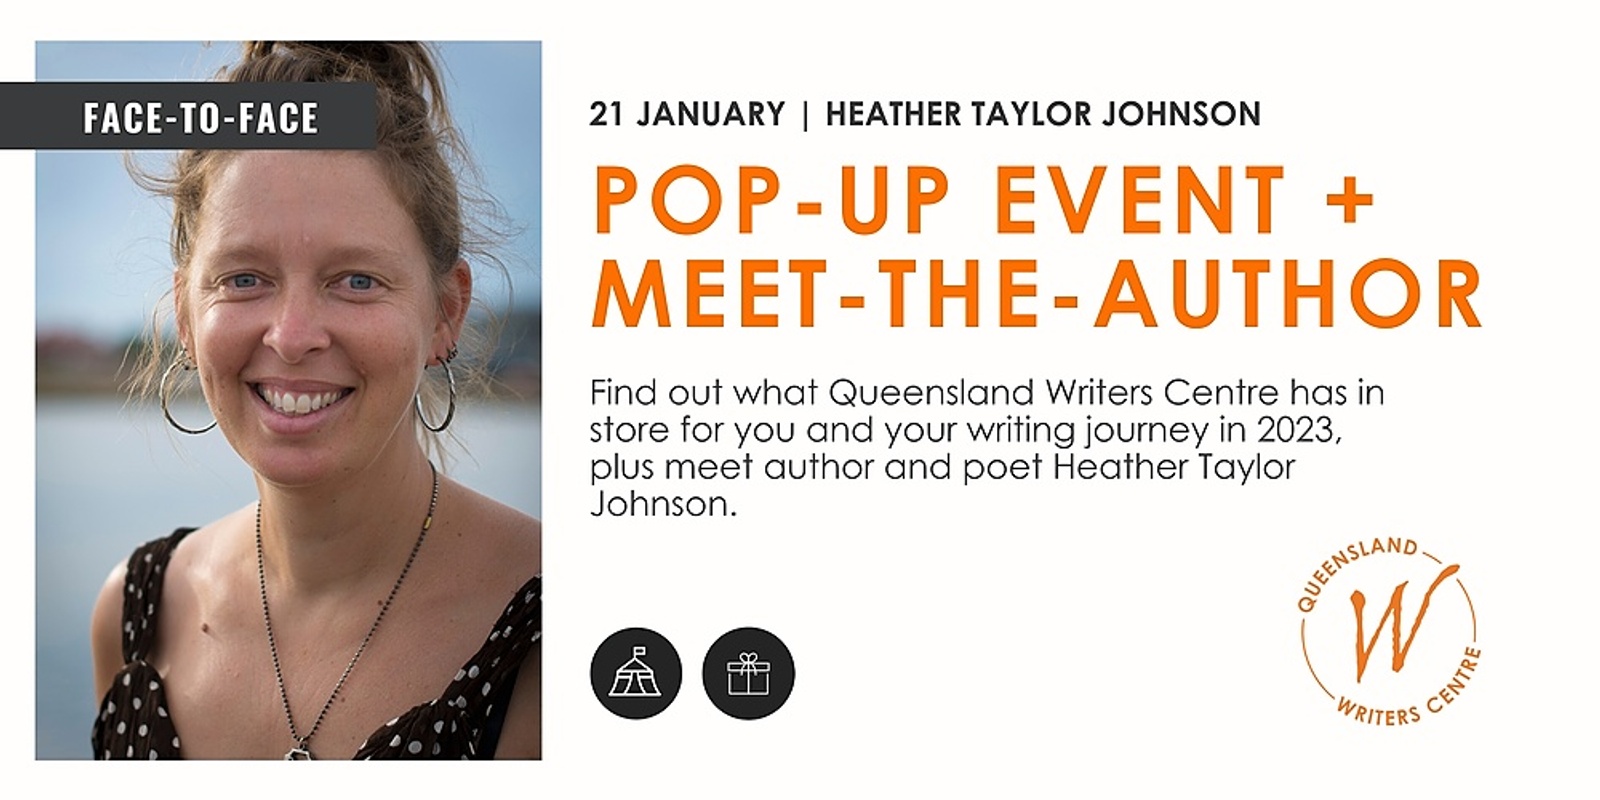 2023 Pop-Up & Meet-the-Author with Heather Taylor Johnson